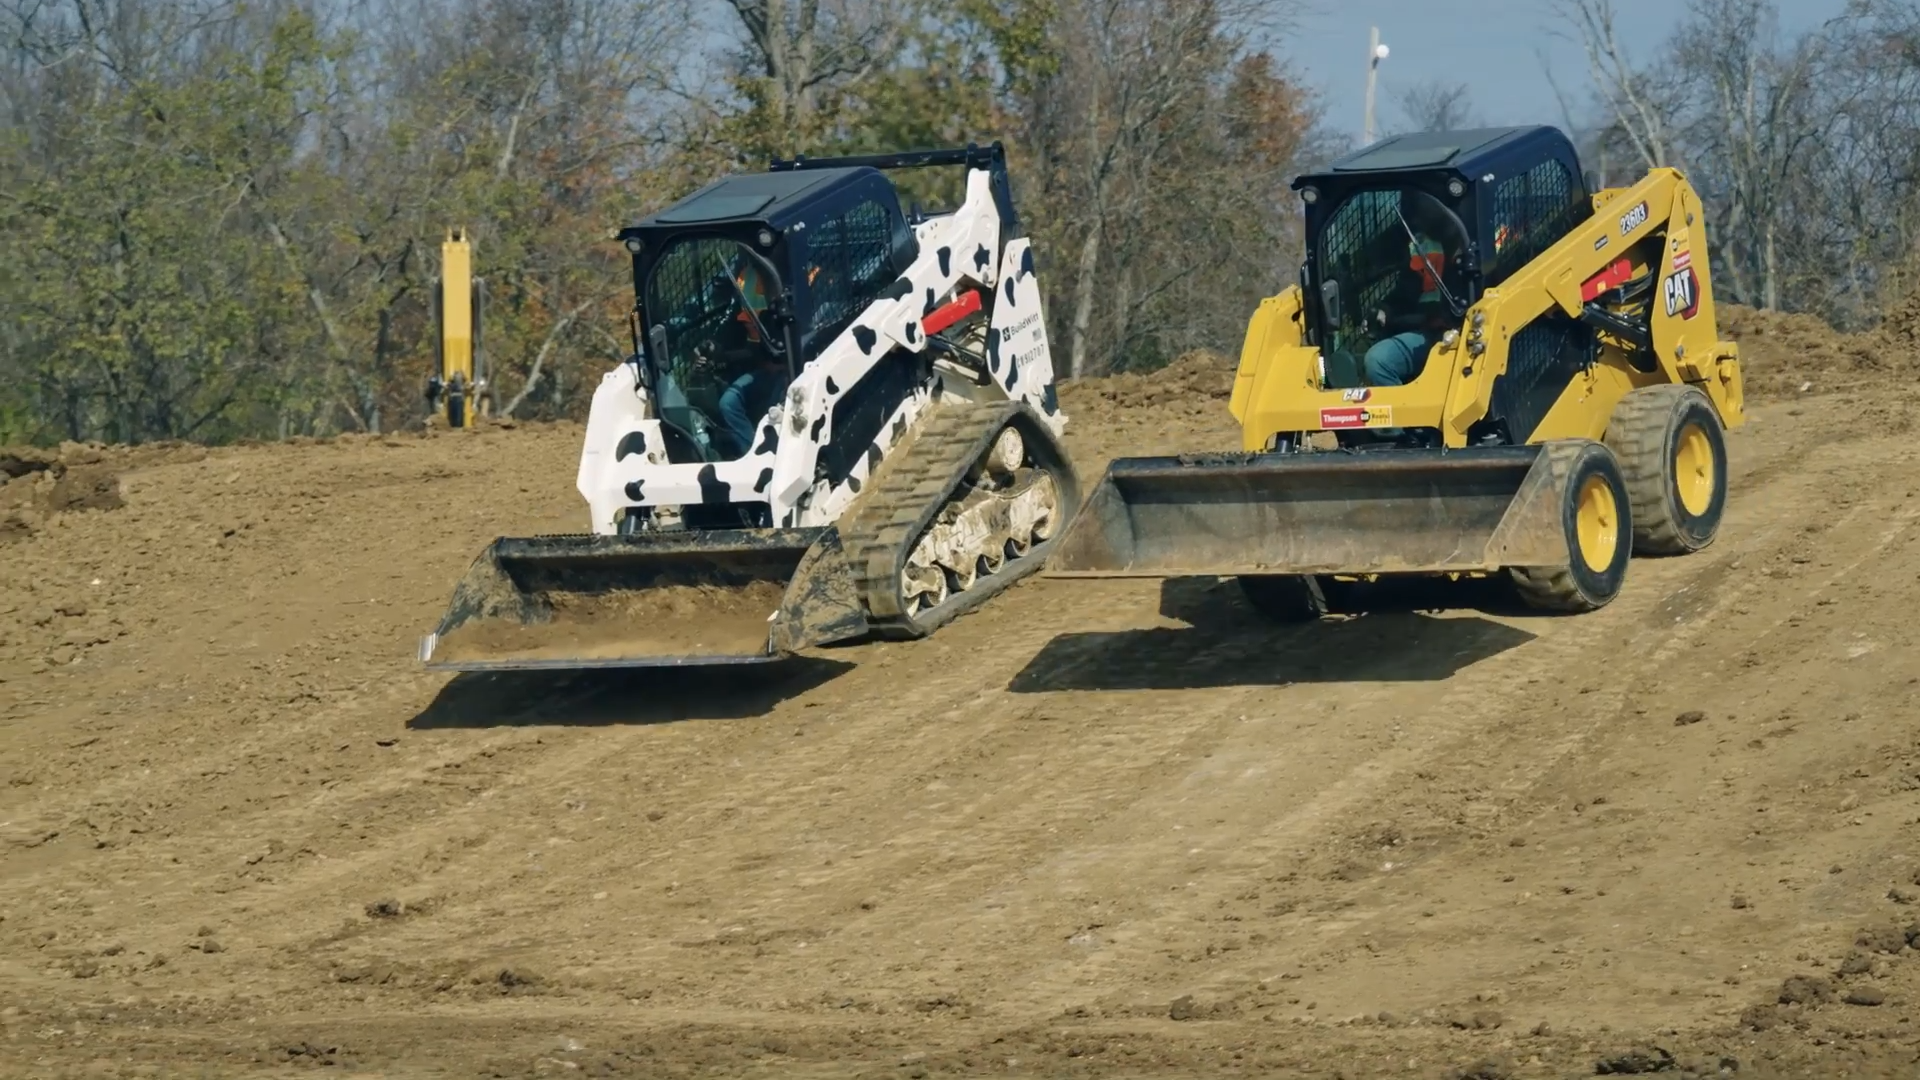 How to Operate a Skid Steer: Level 1